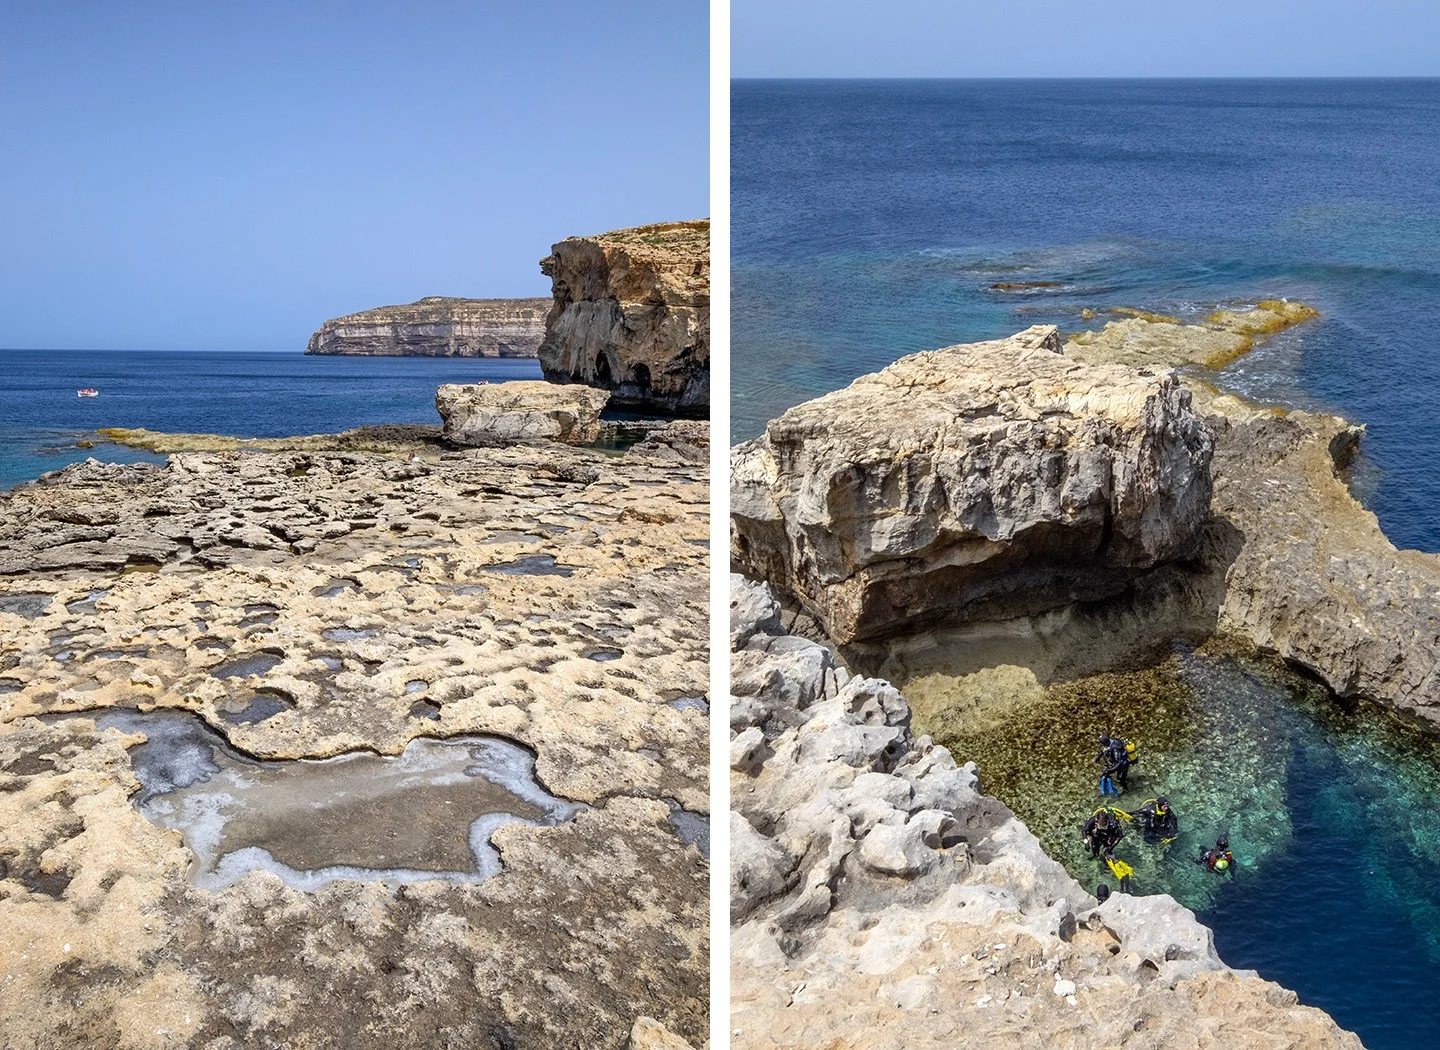 Dwerja and the Blue Hole in Gozo, Malta